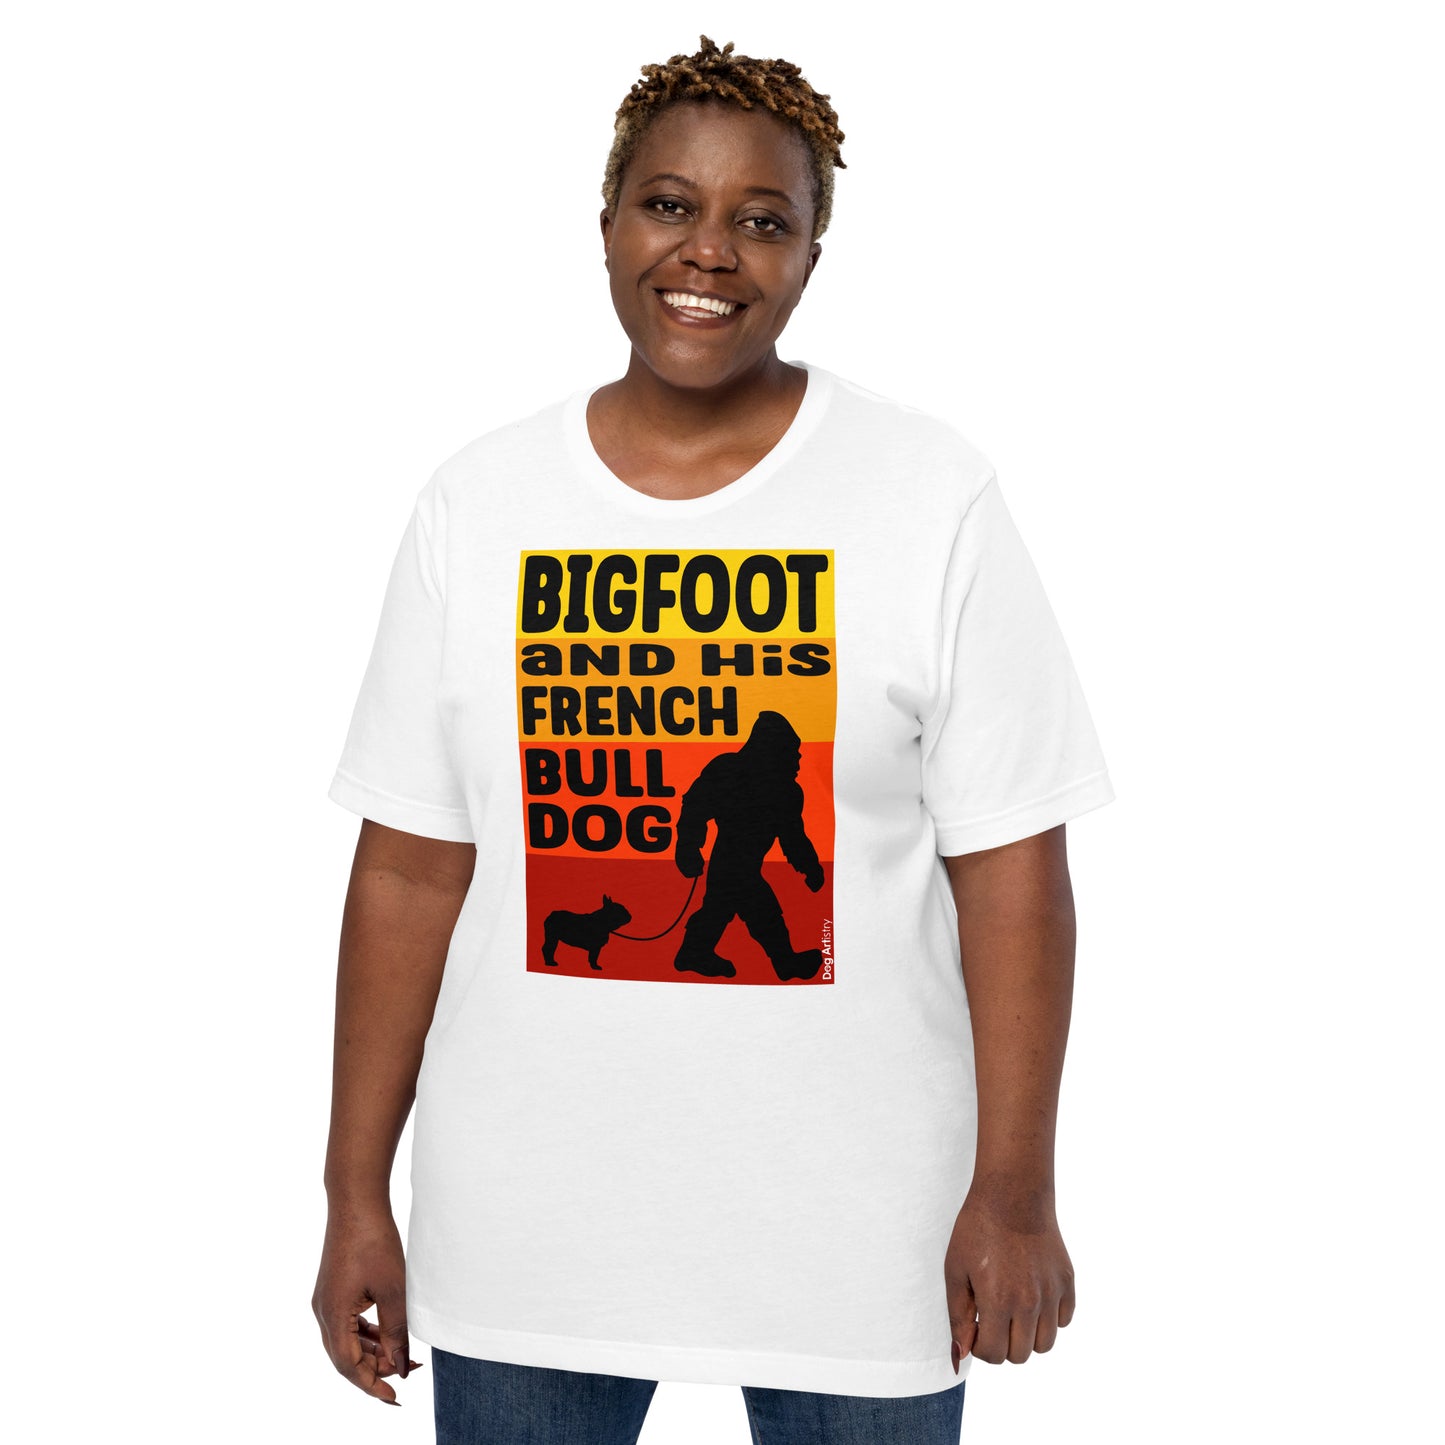 Bigfoot and his French Bulldog unisex white t-shirt by Dog Artistry.